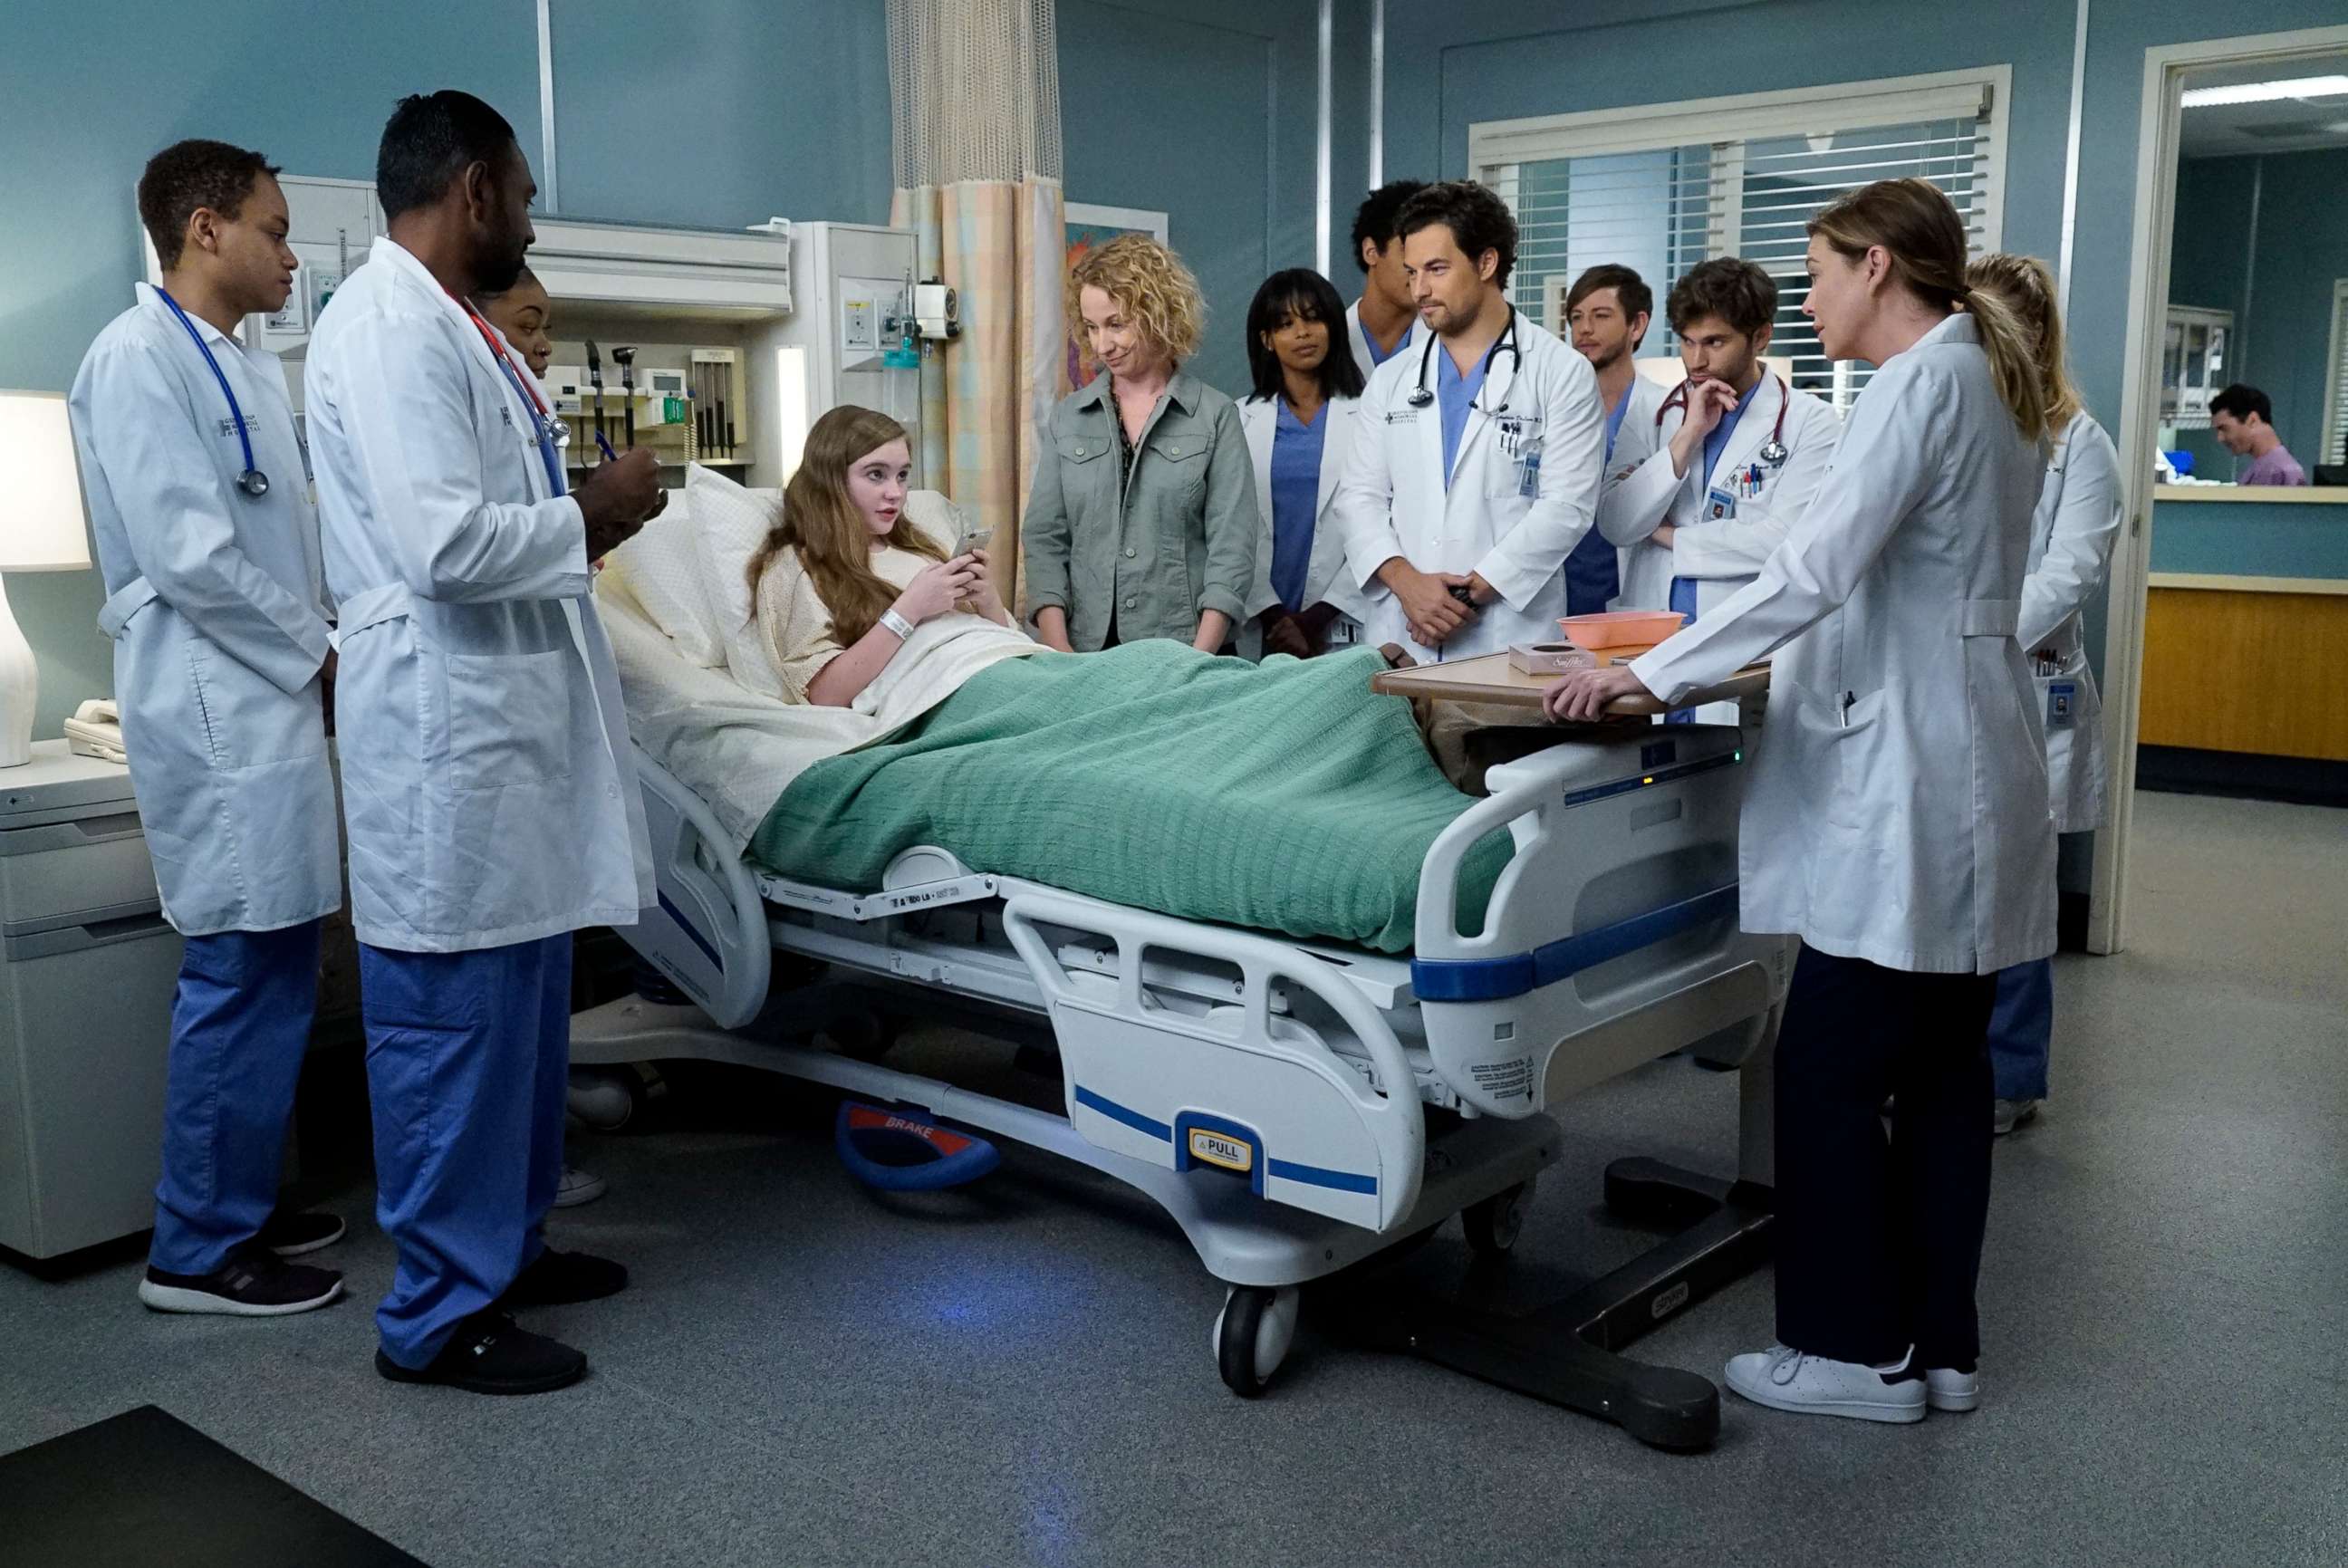 PHOTO: The fall finale of ABC's "Grey's Anatomy," aired on Nov. 21, 2019.